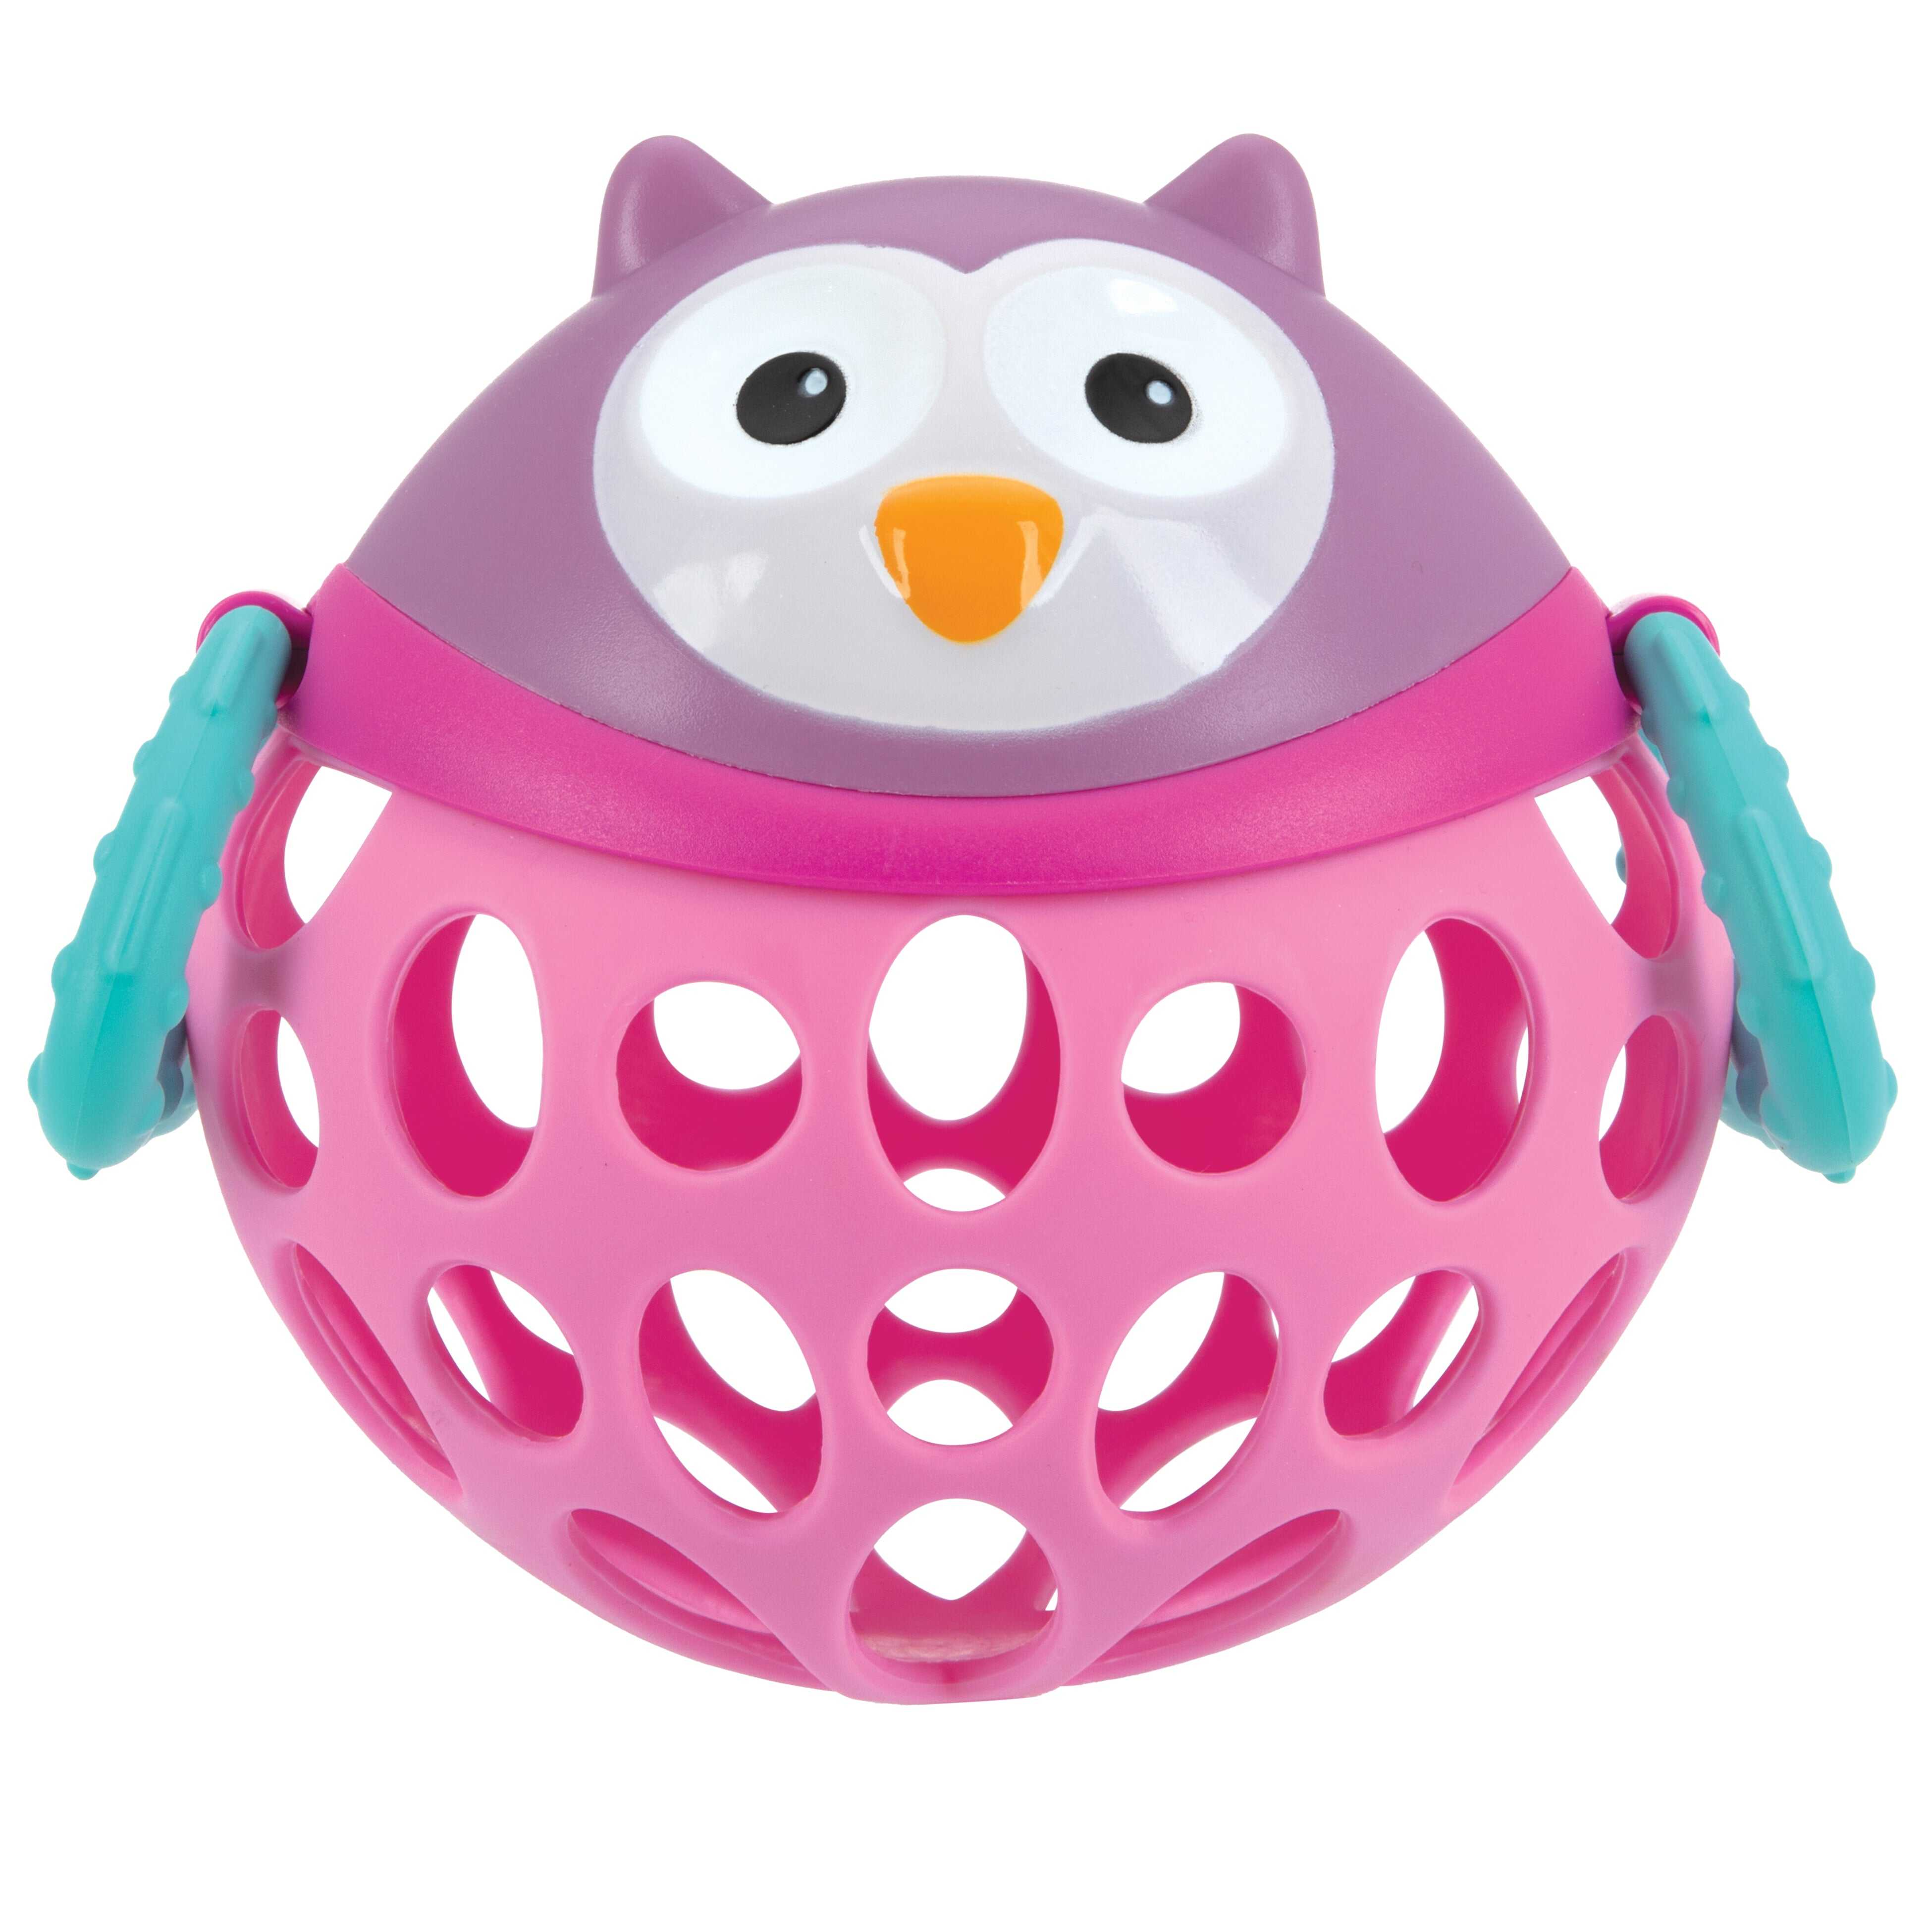 Silly Shaker Rattle Toy - Owl